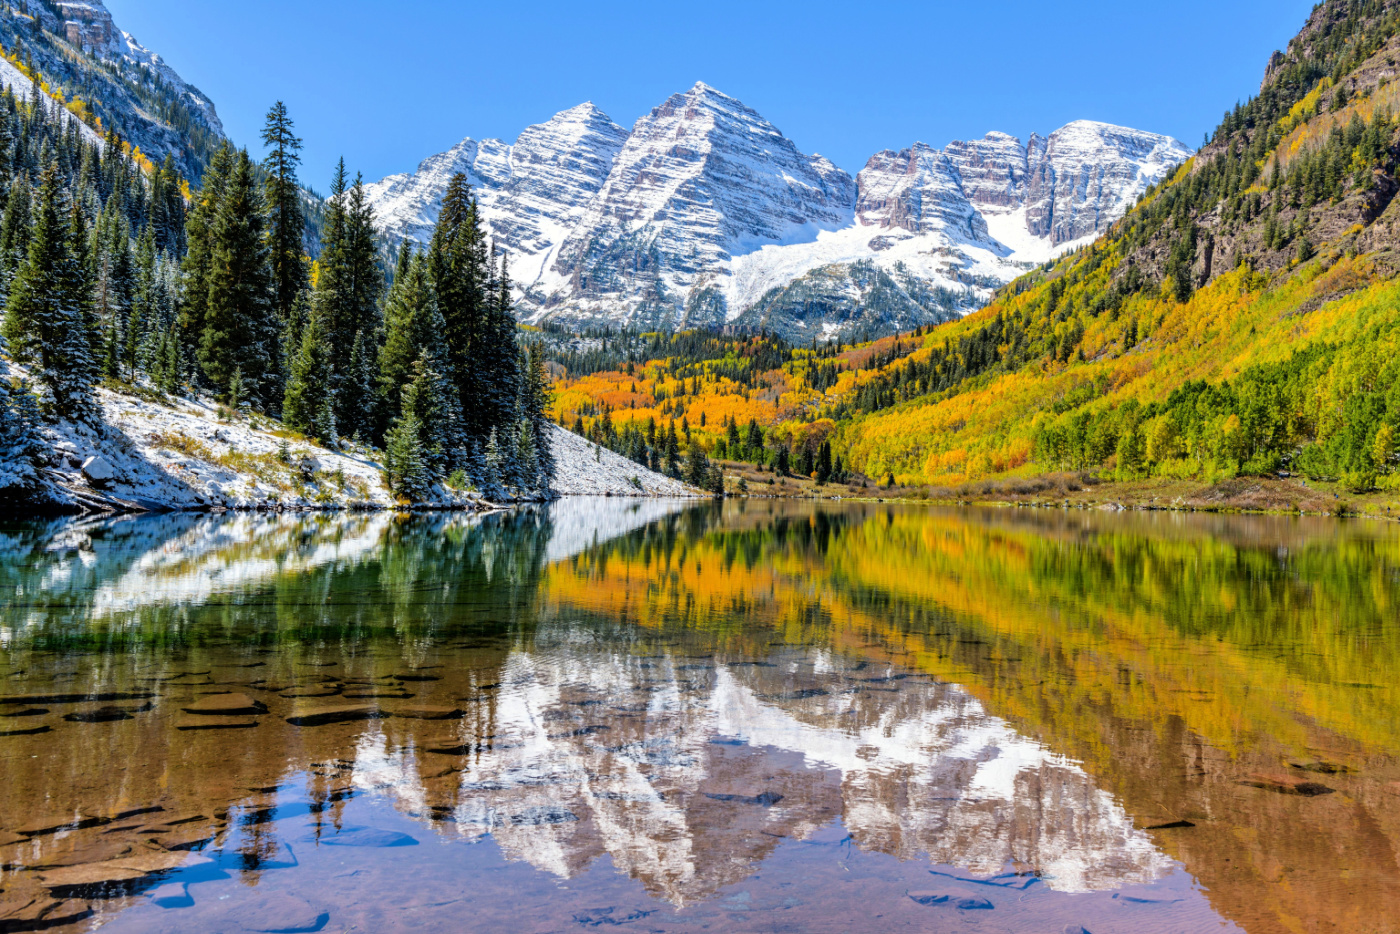 5 reasons to Visit Aspen in Early Winter